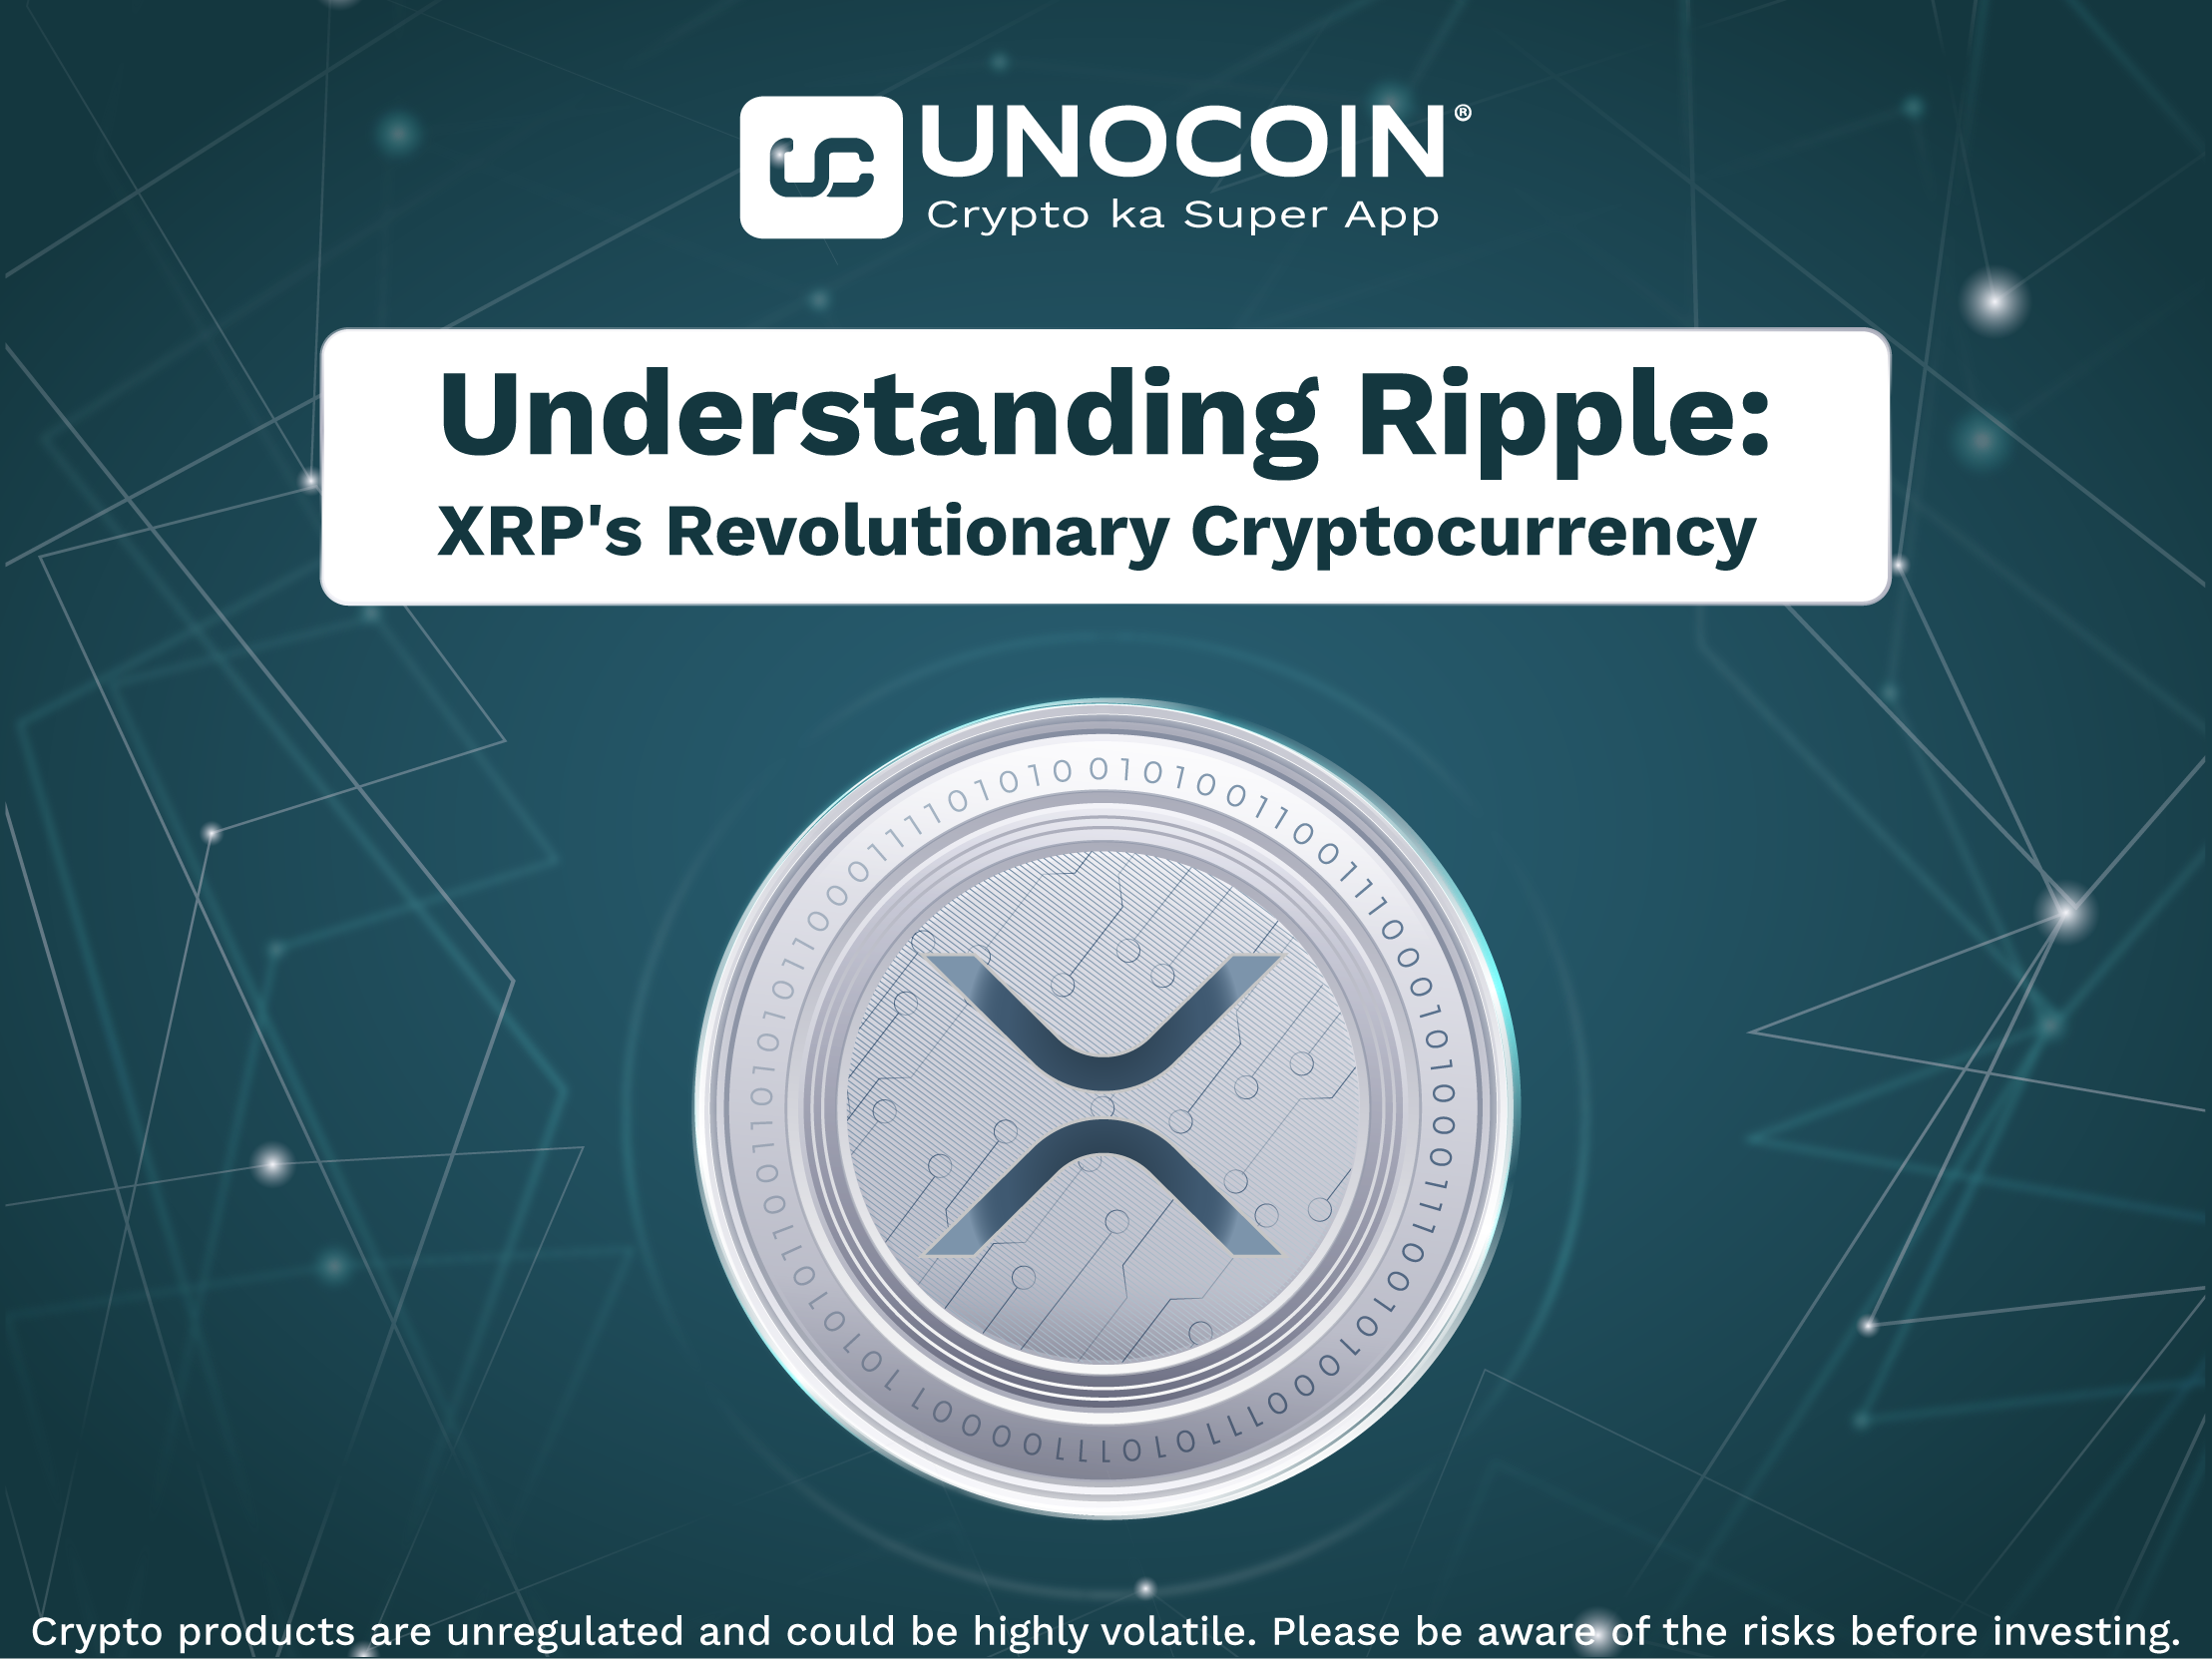 What Is XRP? The Cryptocurrency Created by Ripple Founders - Decrypt